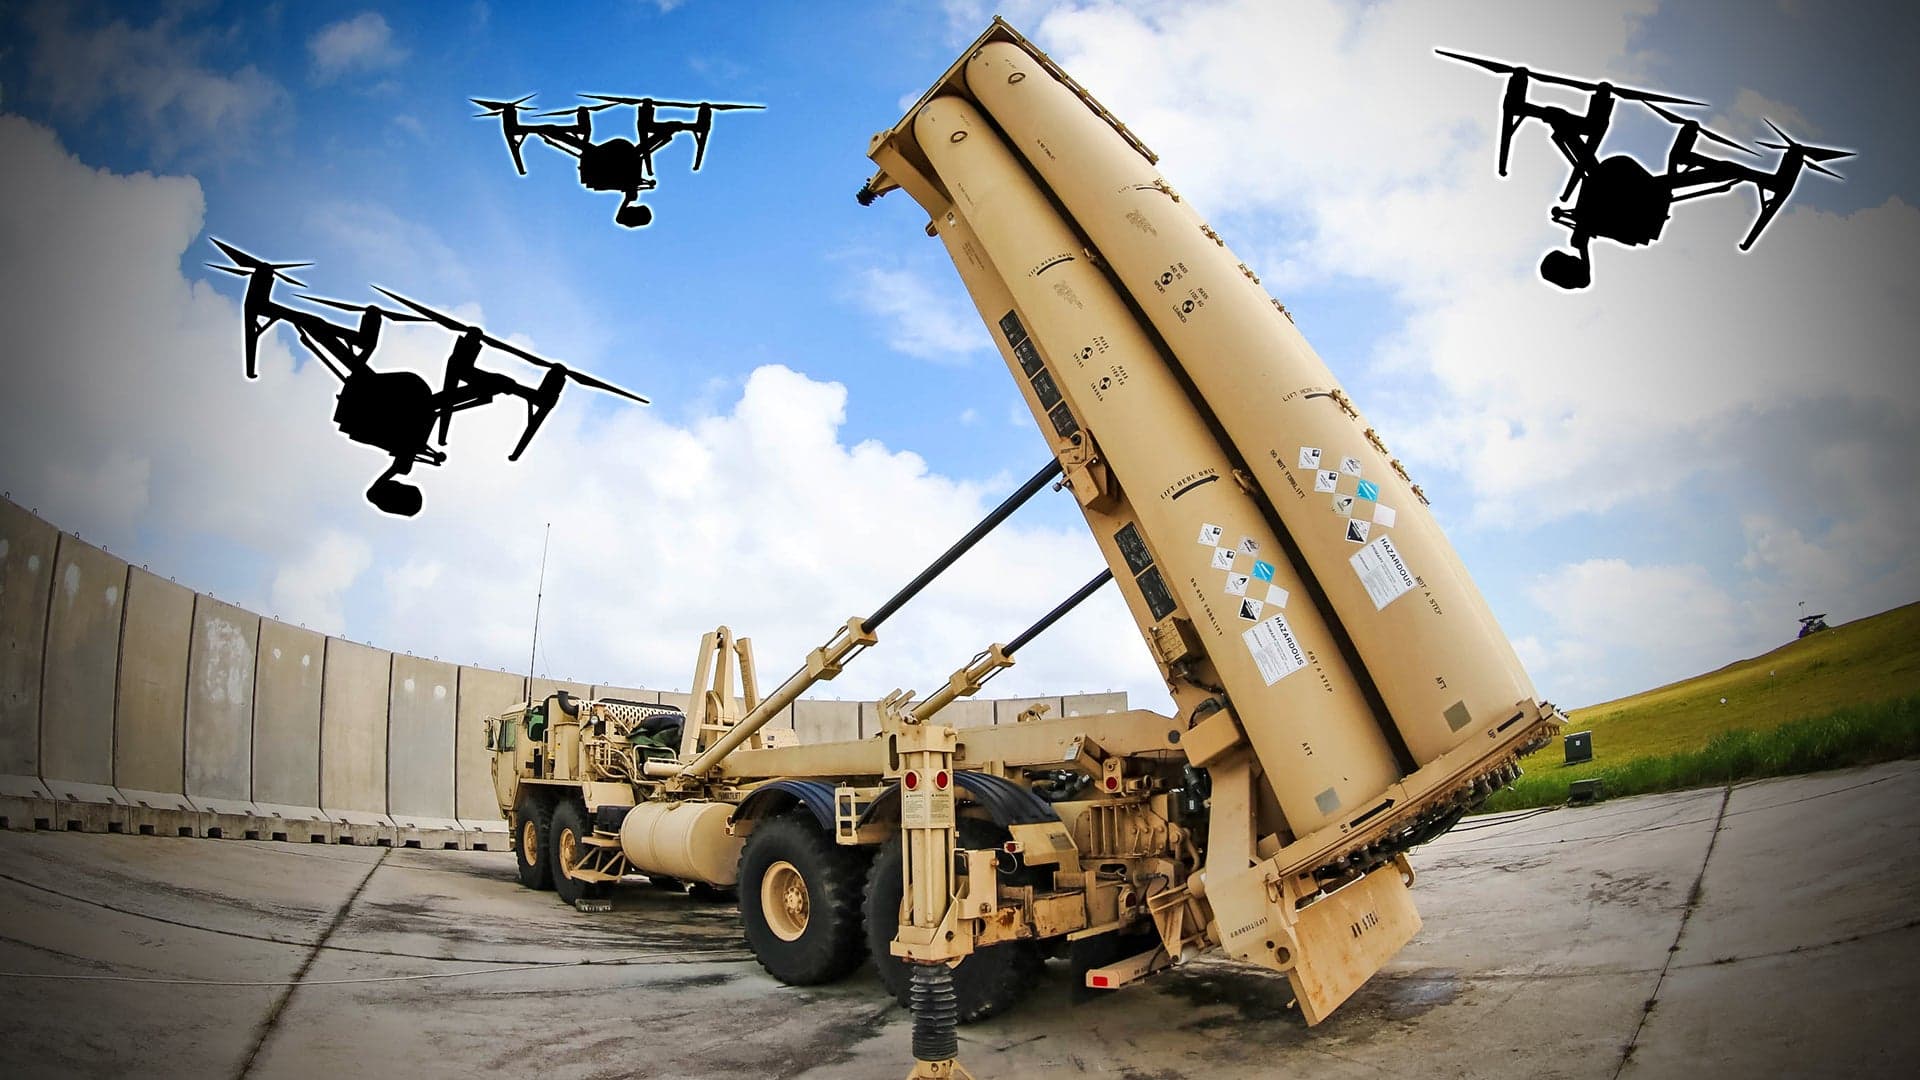 Mysterious Drone Incursions Have Occurred Over U.S. THAAD Anti-Ballistic Missile Battery In Guam